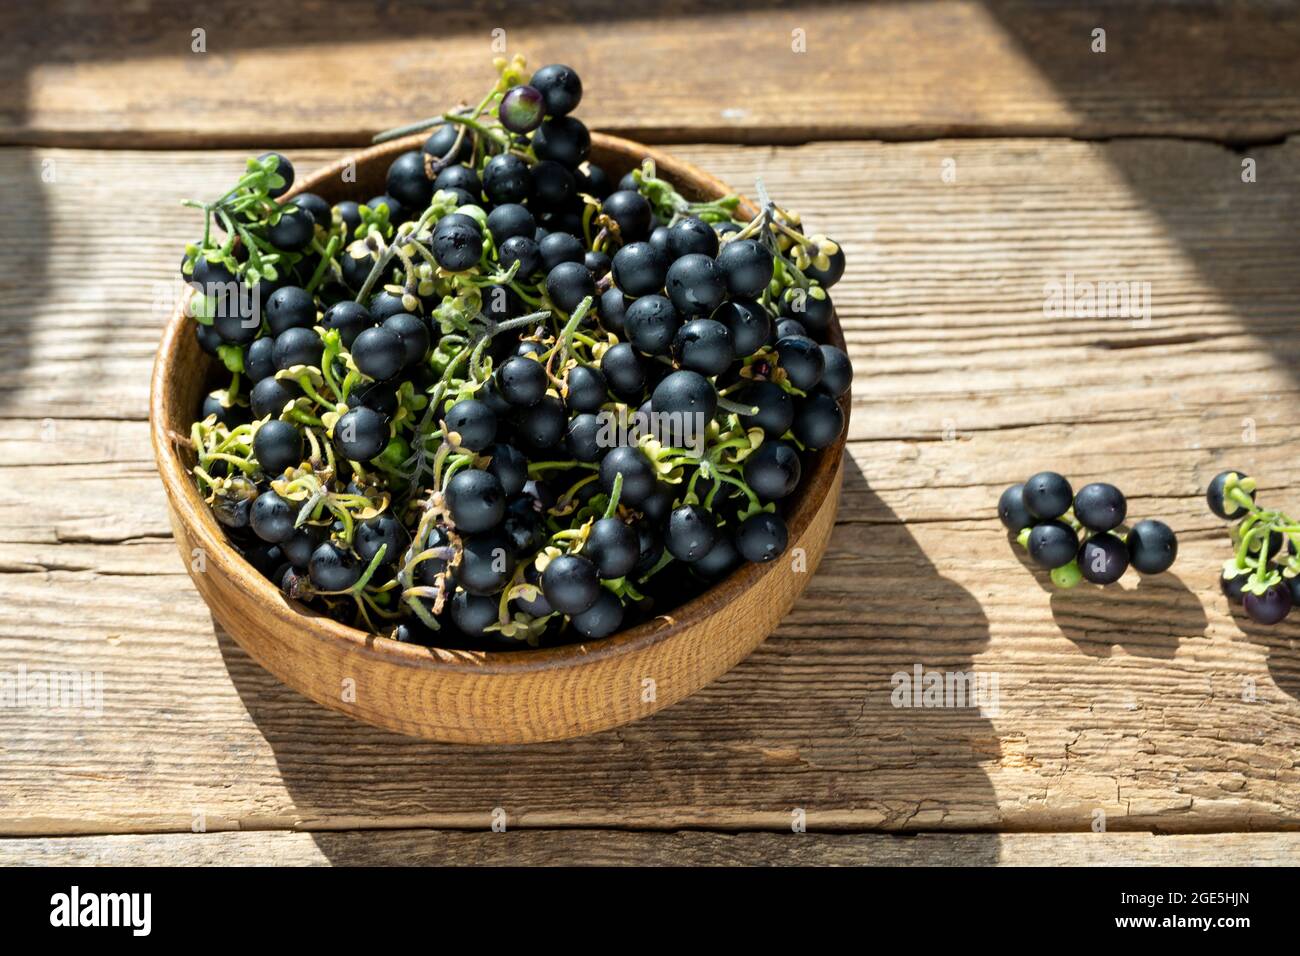 Black nightshade berries in a plate on table close-up. Nightshade in cooking. Healthy food. Harvest for baking Stock Photo